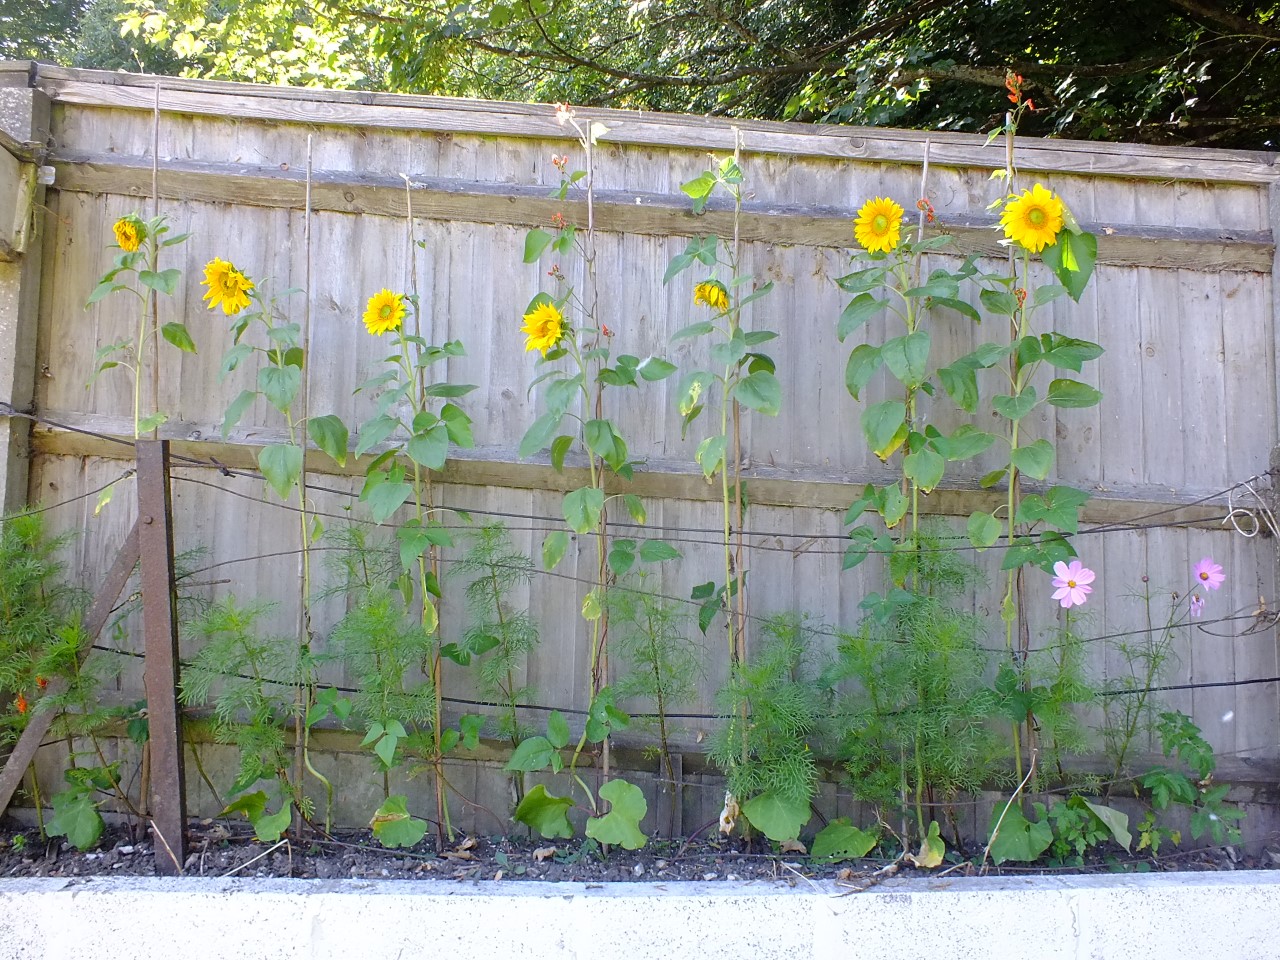 Derek P - Here is a photo of the sunflowers I grew, underplanted with Cosmos with Runner Beans growing up the support sticks.  The highest reached 140cm.